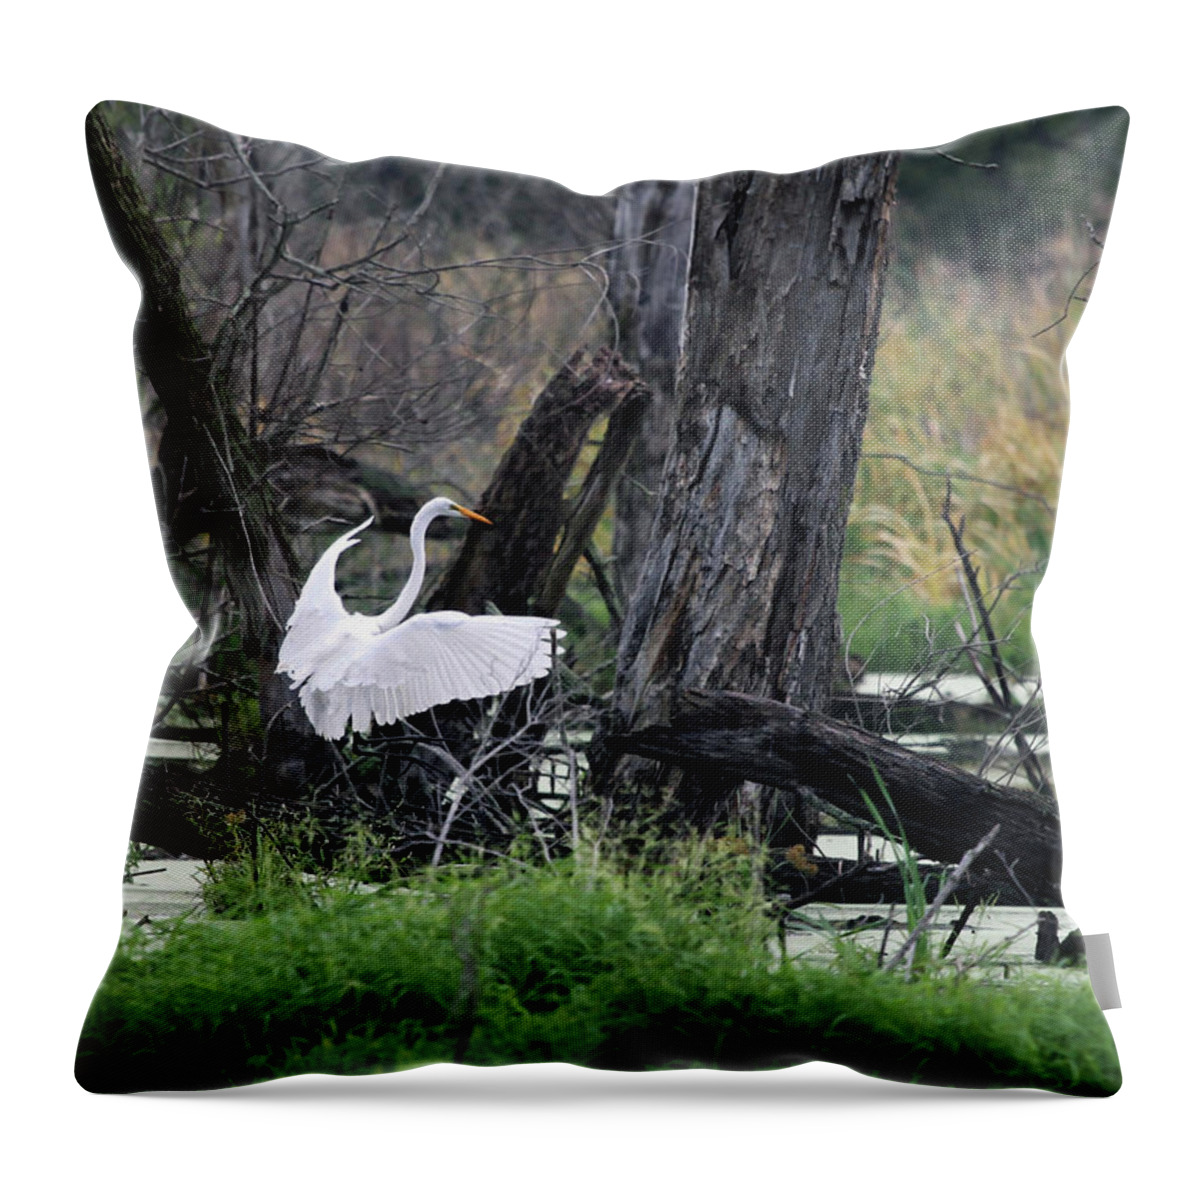 Egret Throw Pillow featuring the photograph Egret In Flight by Jackson Pearson